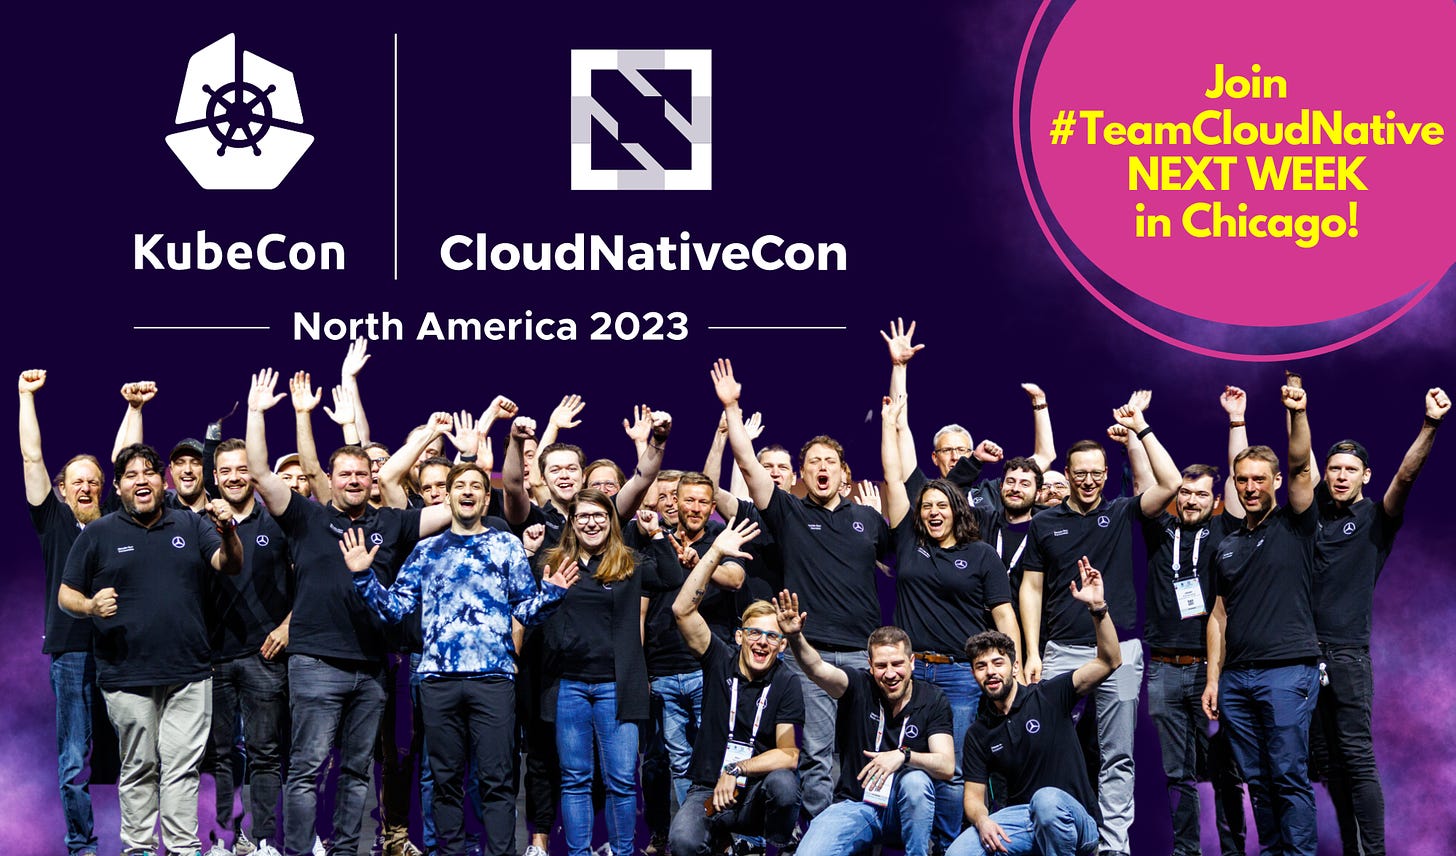 A group of excited looking people in front of a purple-ish backdrop advertising KubeCon